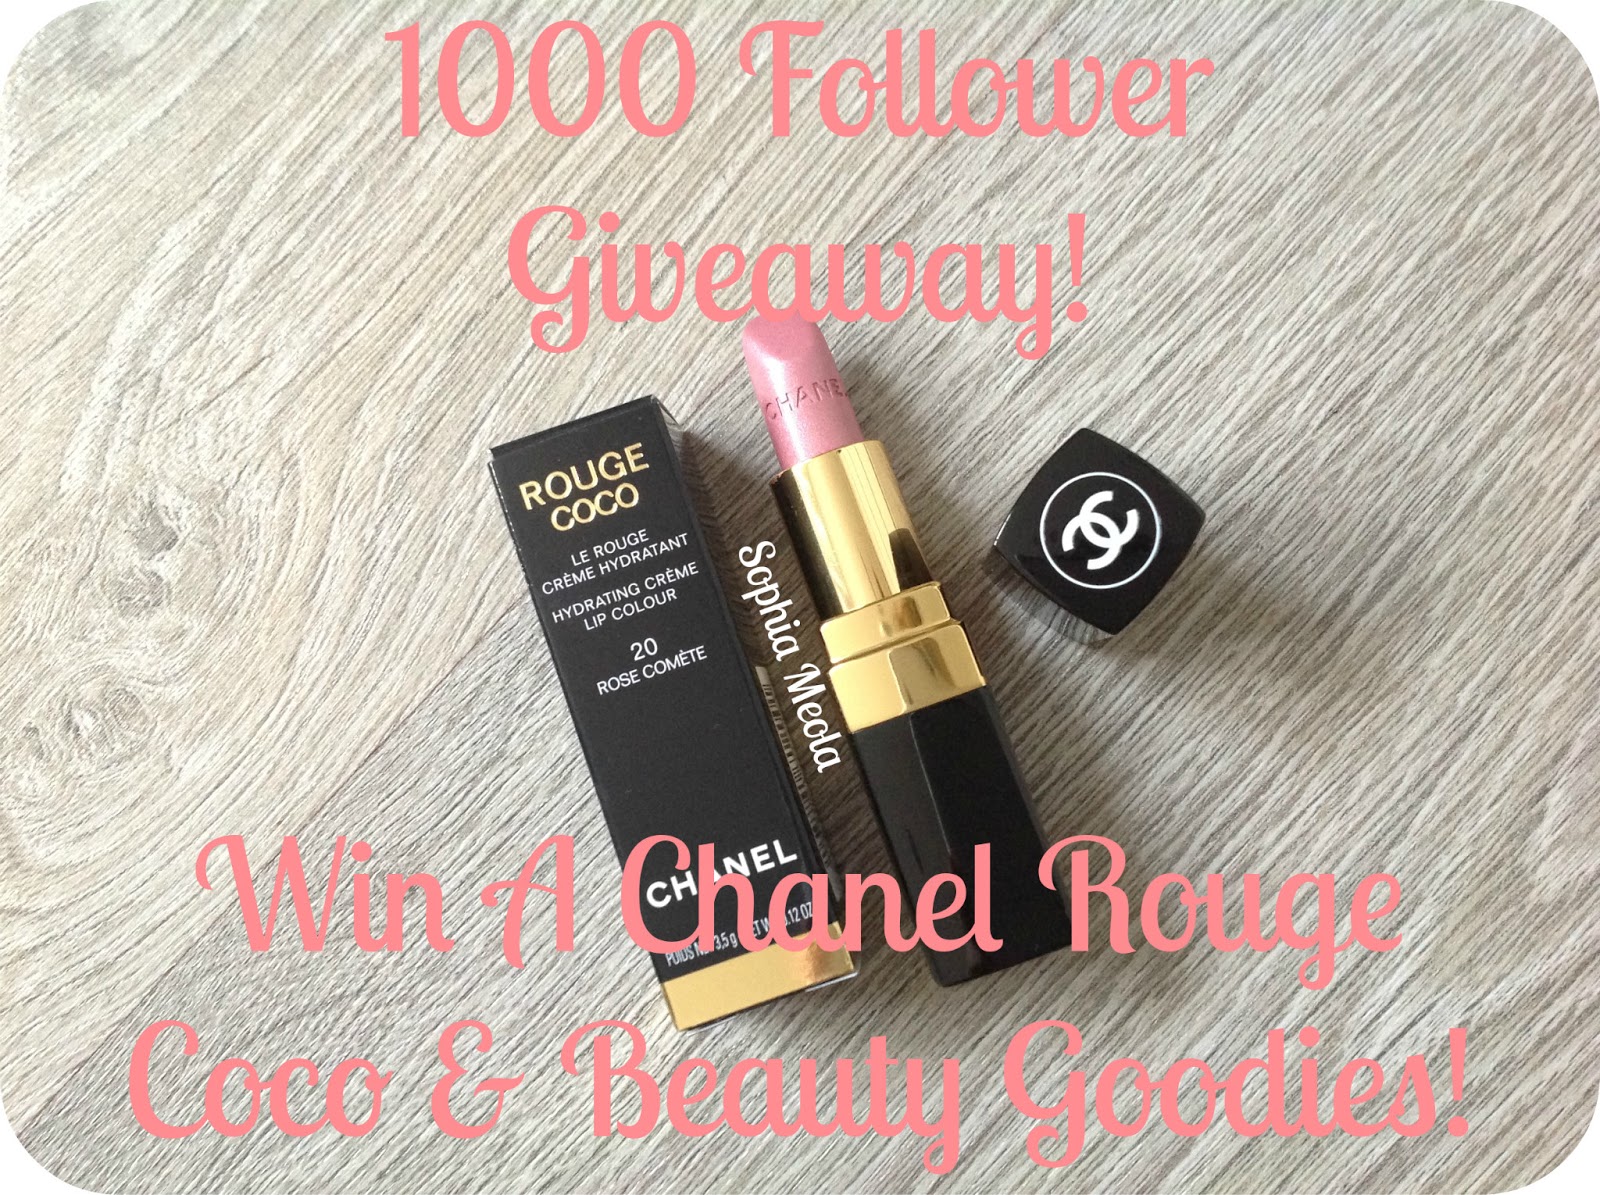 ❤ 1000 Follower Chanel & Beauty Goodie Giveaway ❤